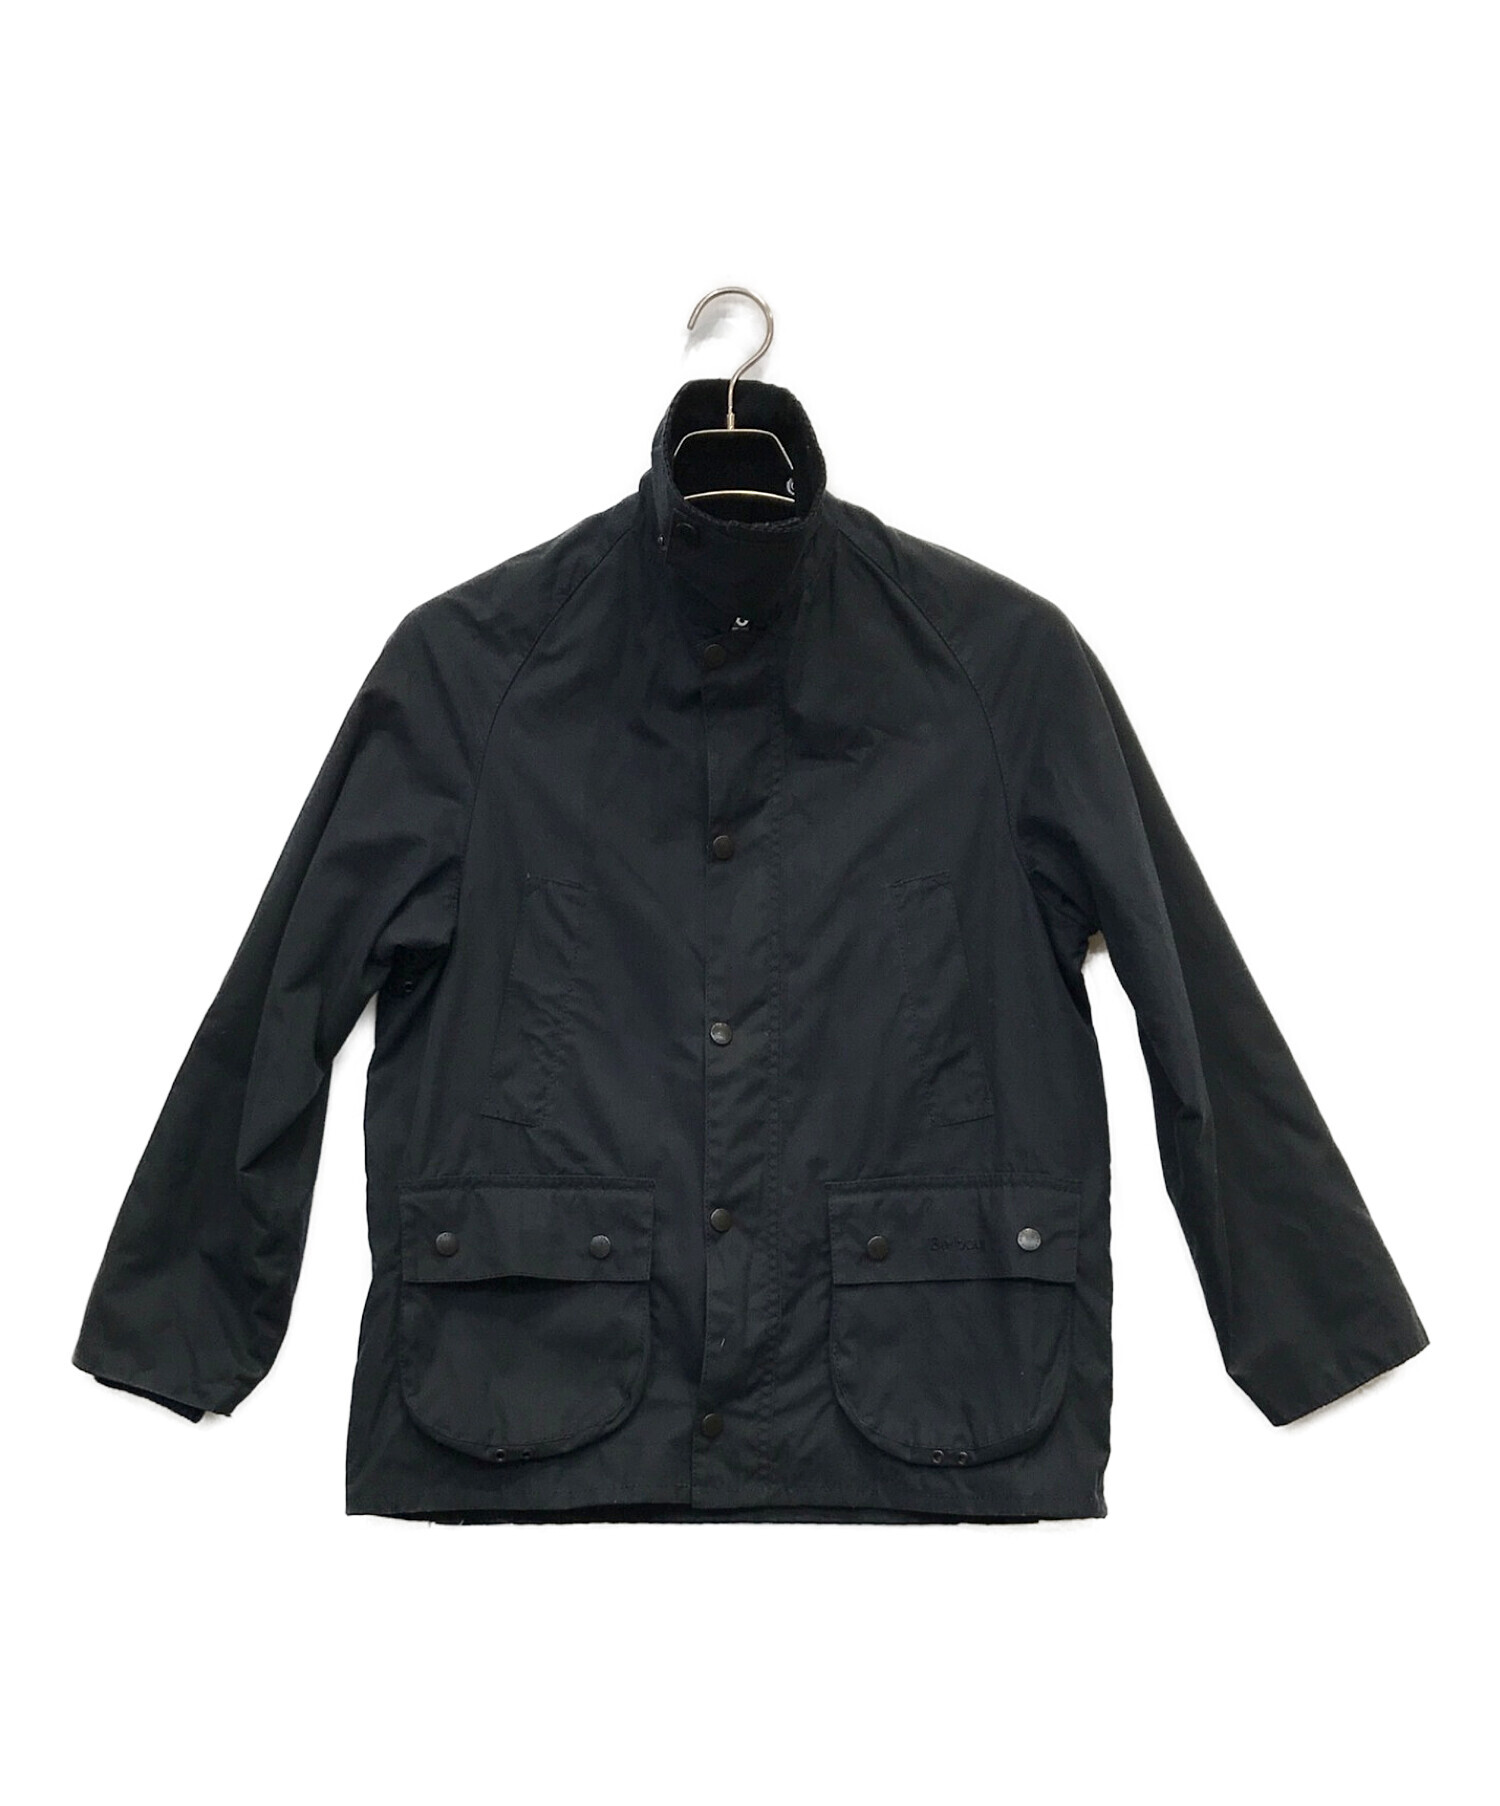 barbour ビデイル ボーイズ